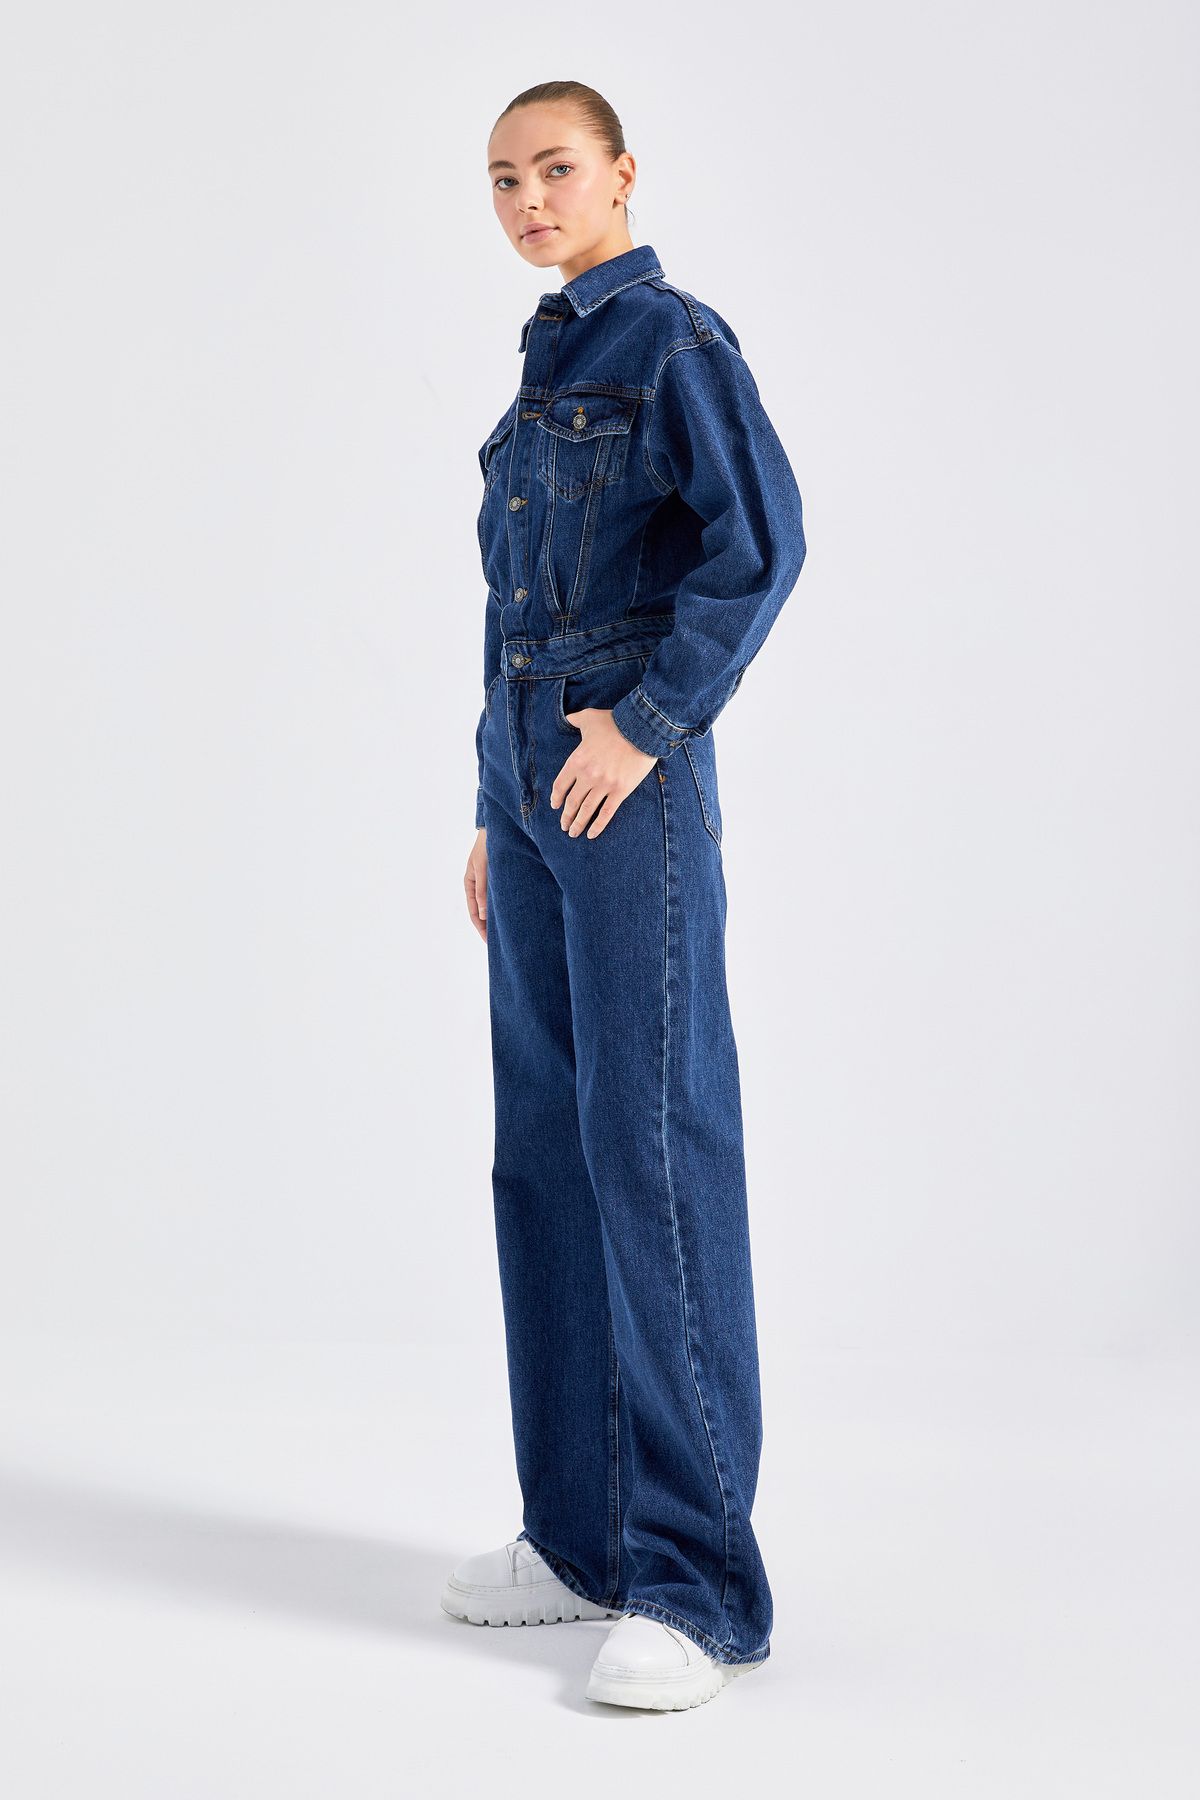 Buy Retro Loose Jeans Overalls, Loose Denim Pants, Oversized Baggy Ladies  Pants, Streetwear Jumpsuit, Casual Denim Dungarees, Mother's Day Gift  Online in India - Etsy